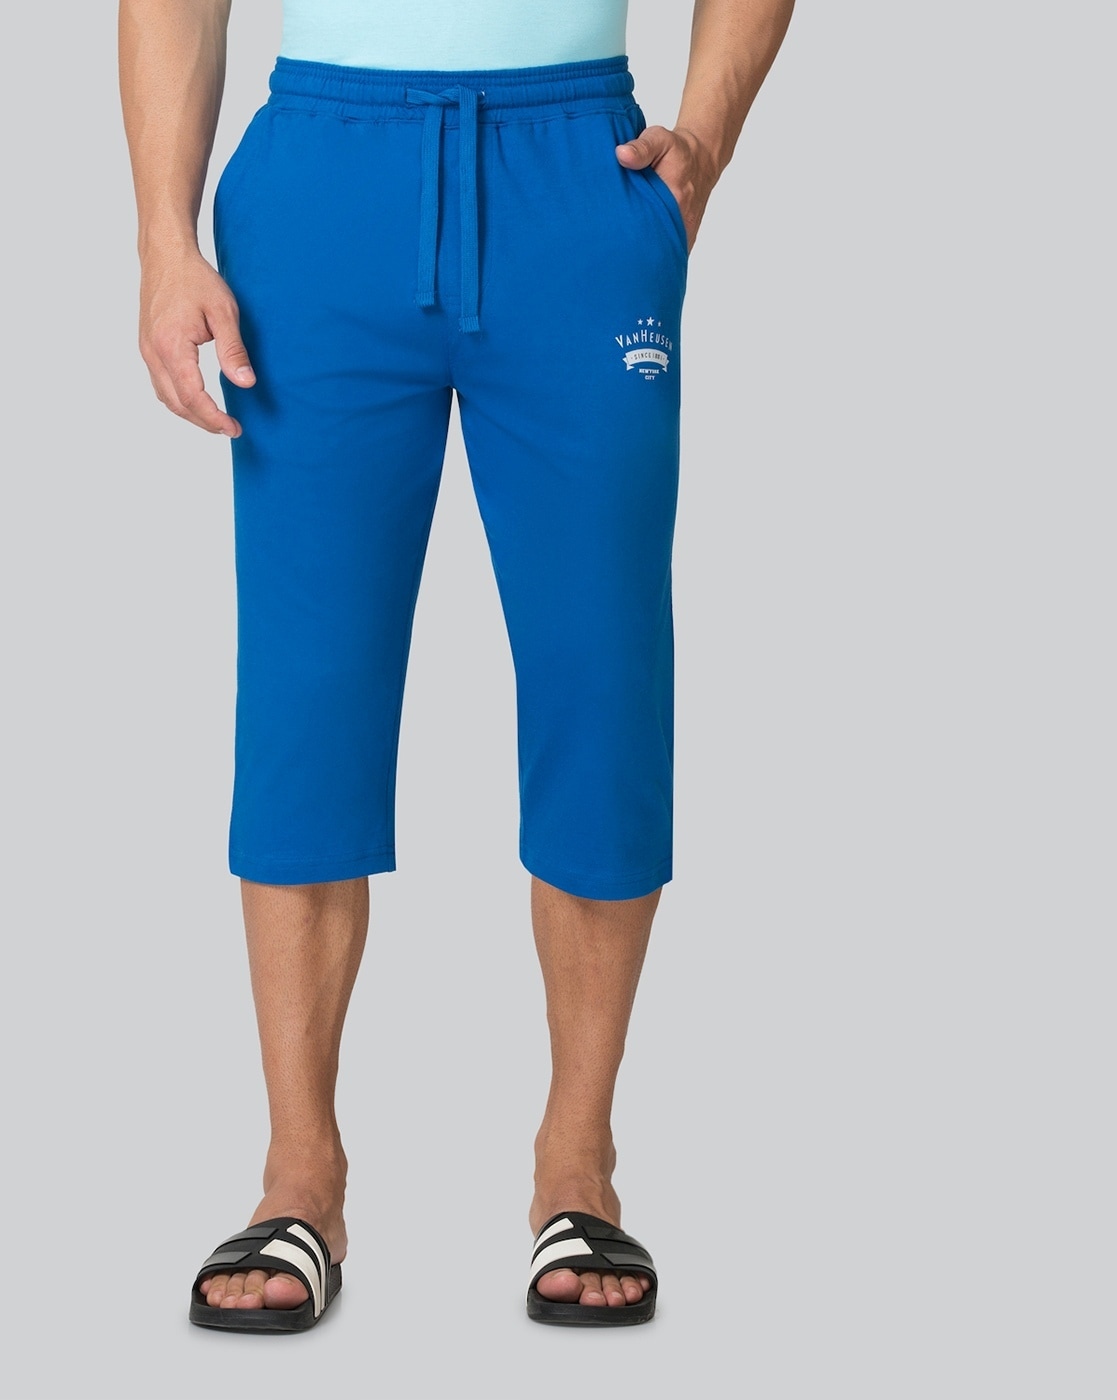 Buy SPORTS 52 WEAR MENS CARGO 3/4 PANTS Online at Low Prices in India -  Paytmmall.com